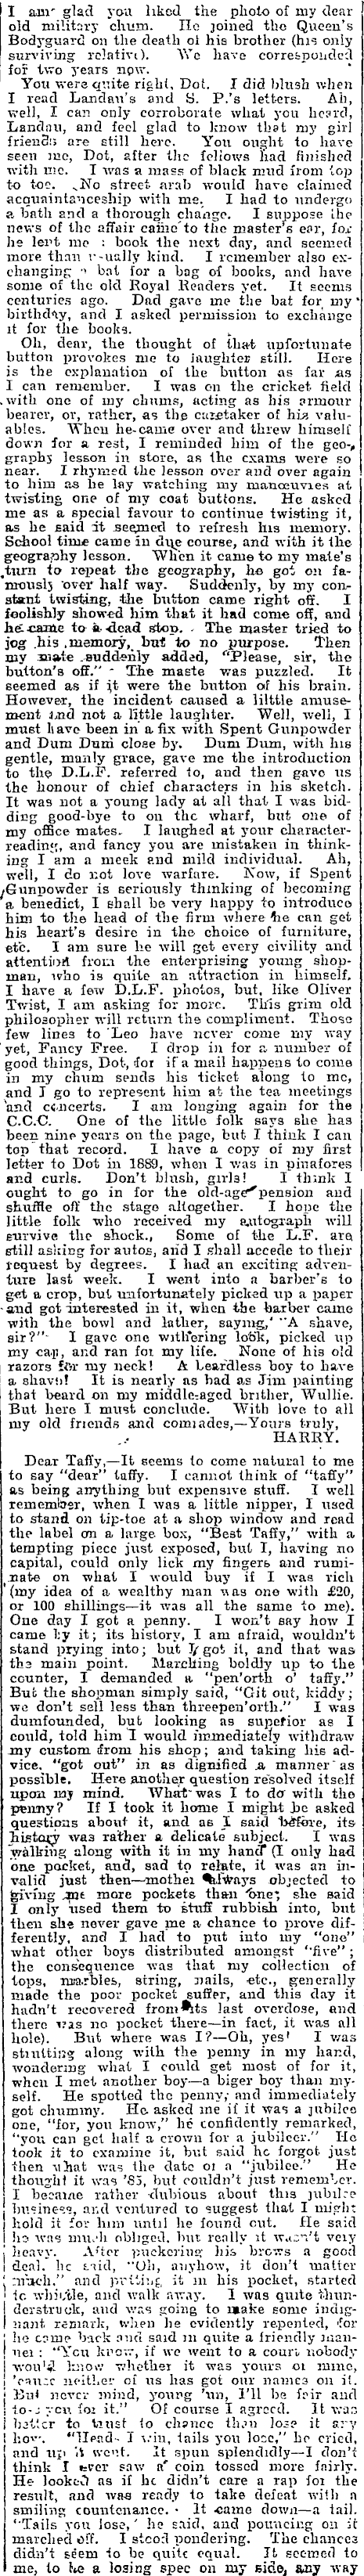 Newspapers Otago Witness 8 May 1901